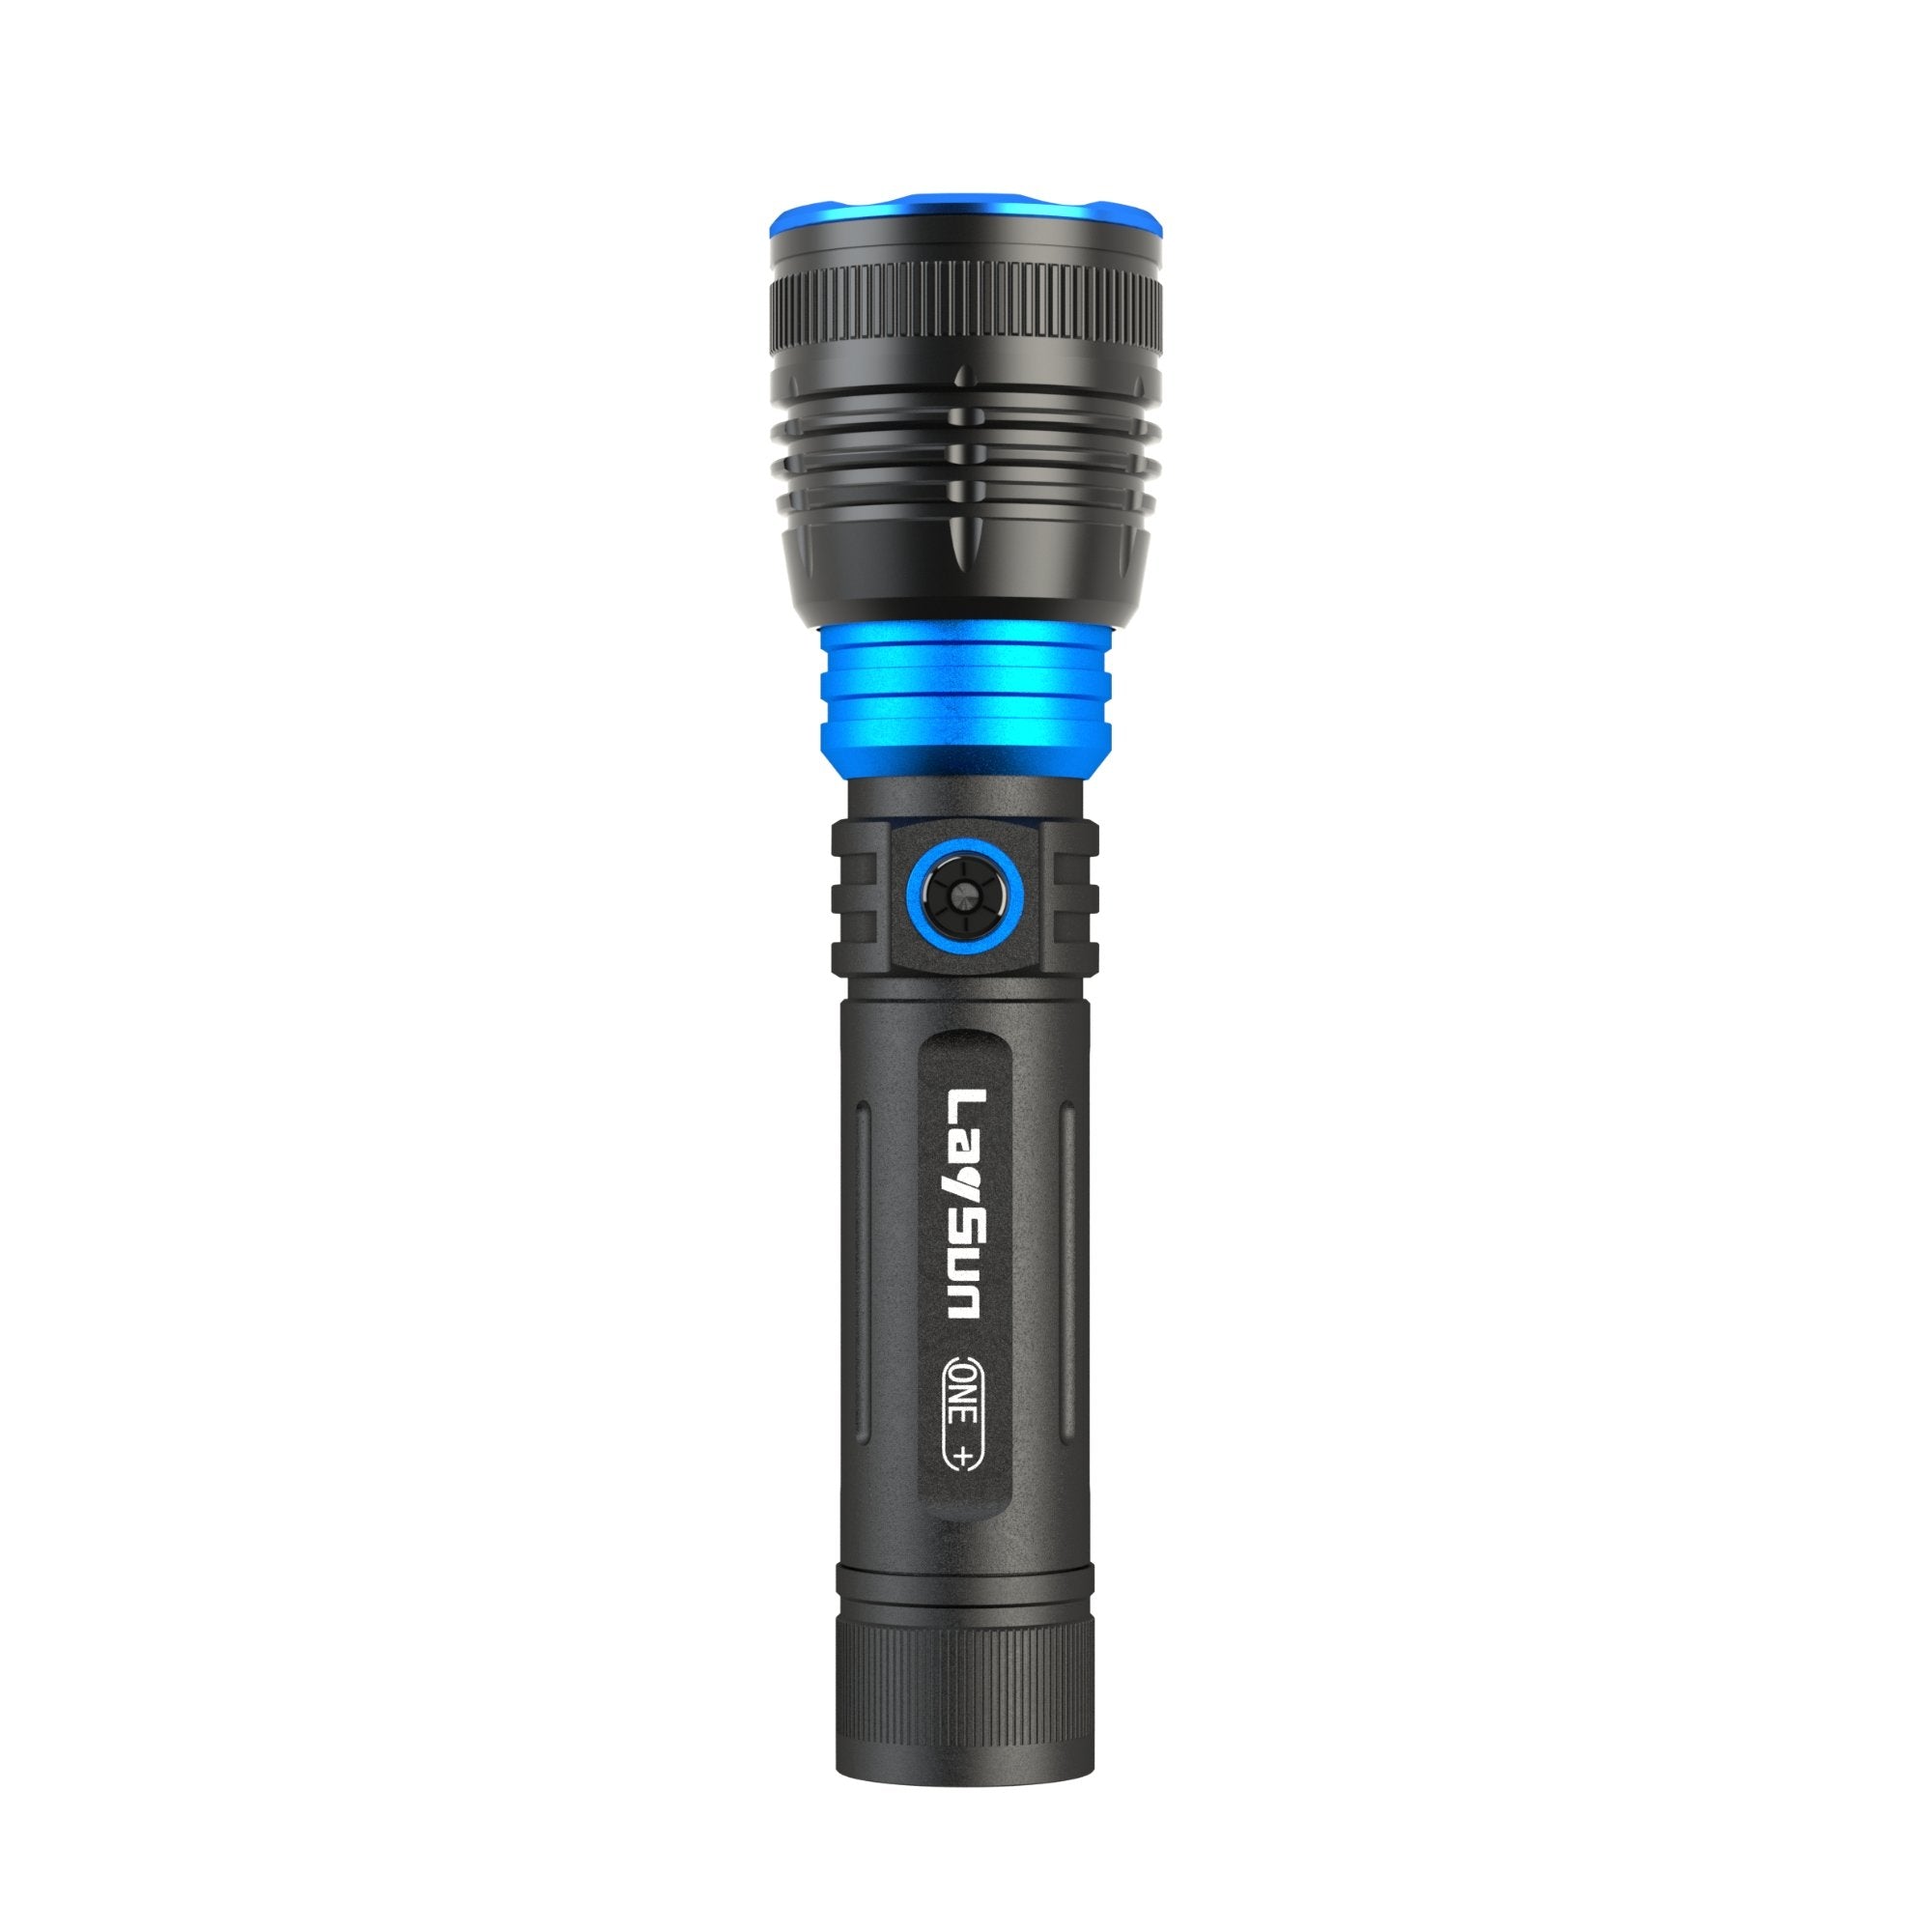 LaySun Quick Connect 1500LM High Power Rechargeable LED Zoom Flashlight - LaySun Smart